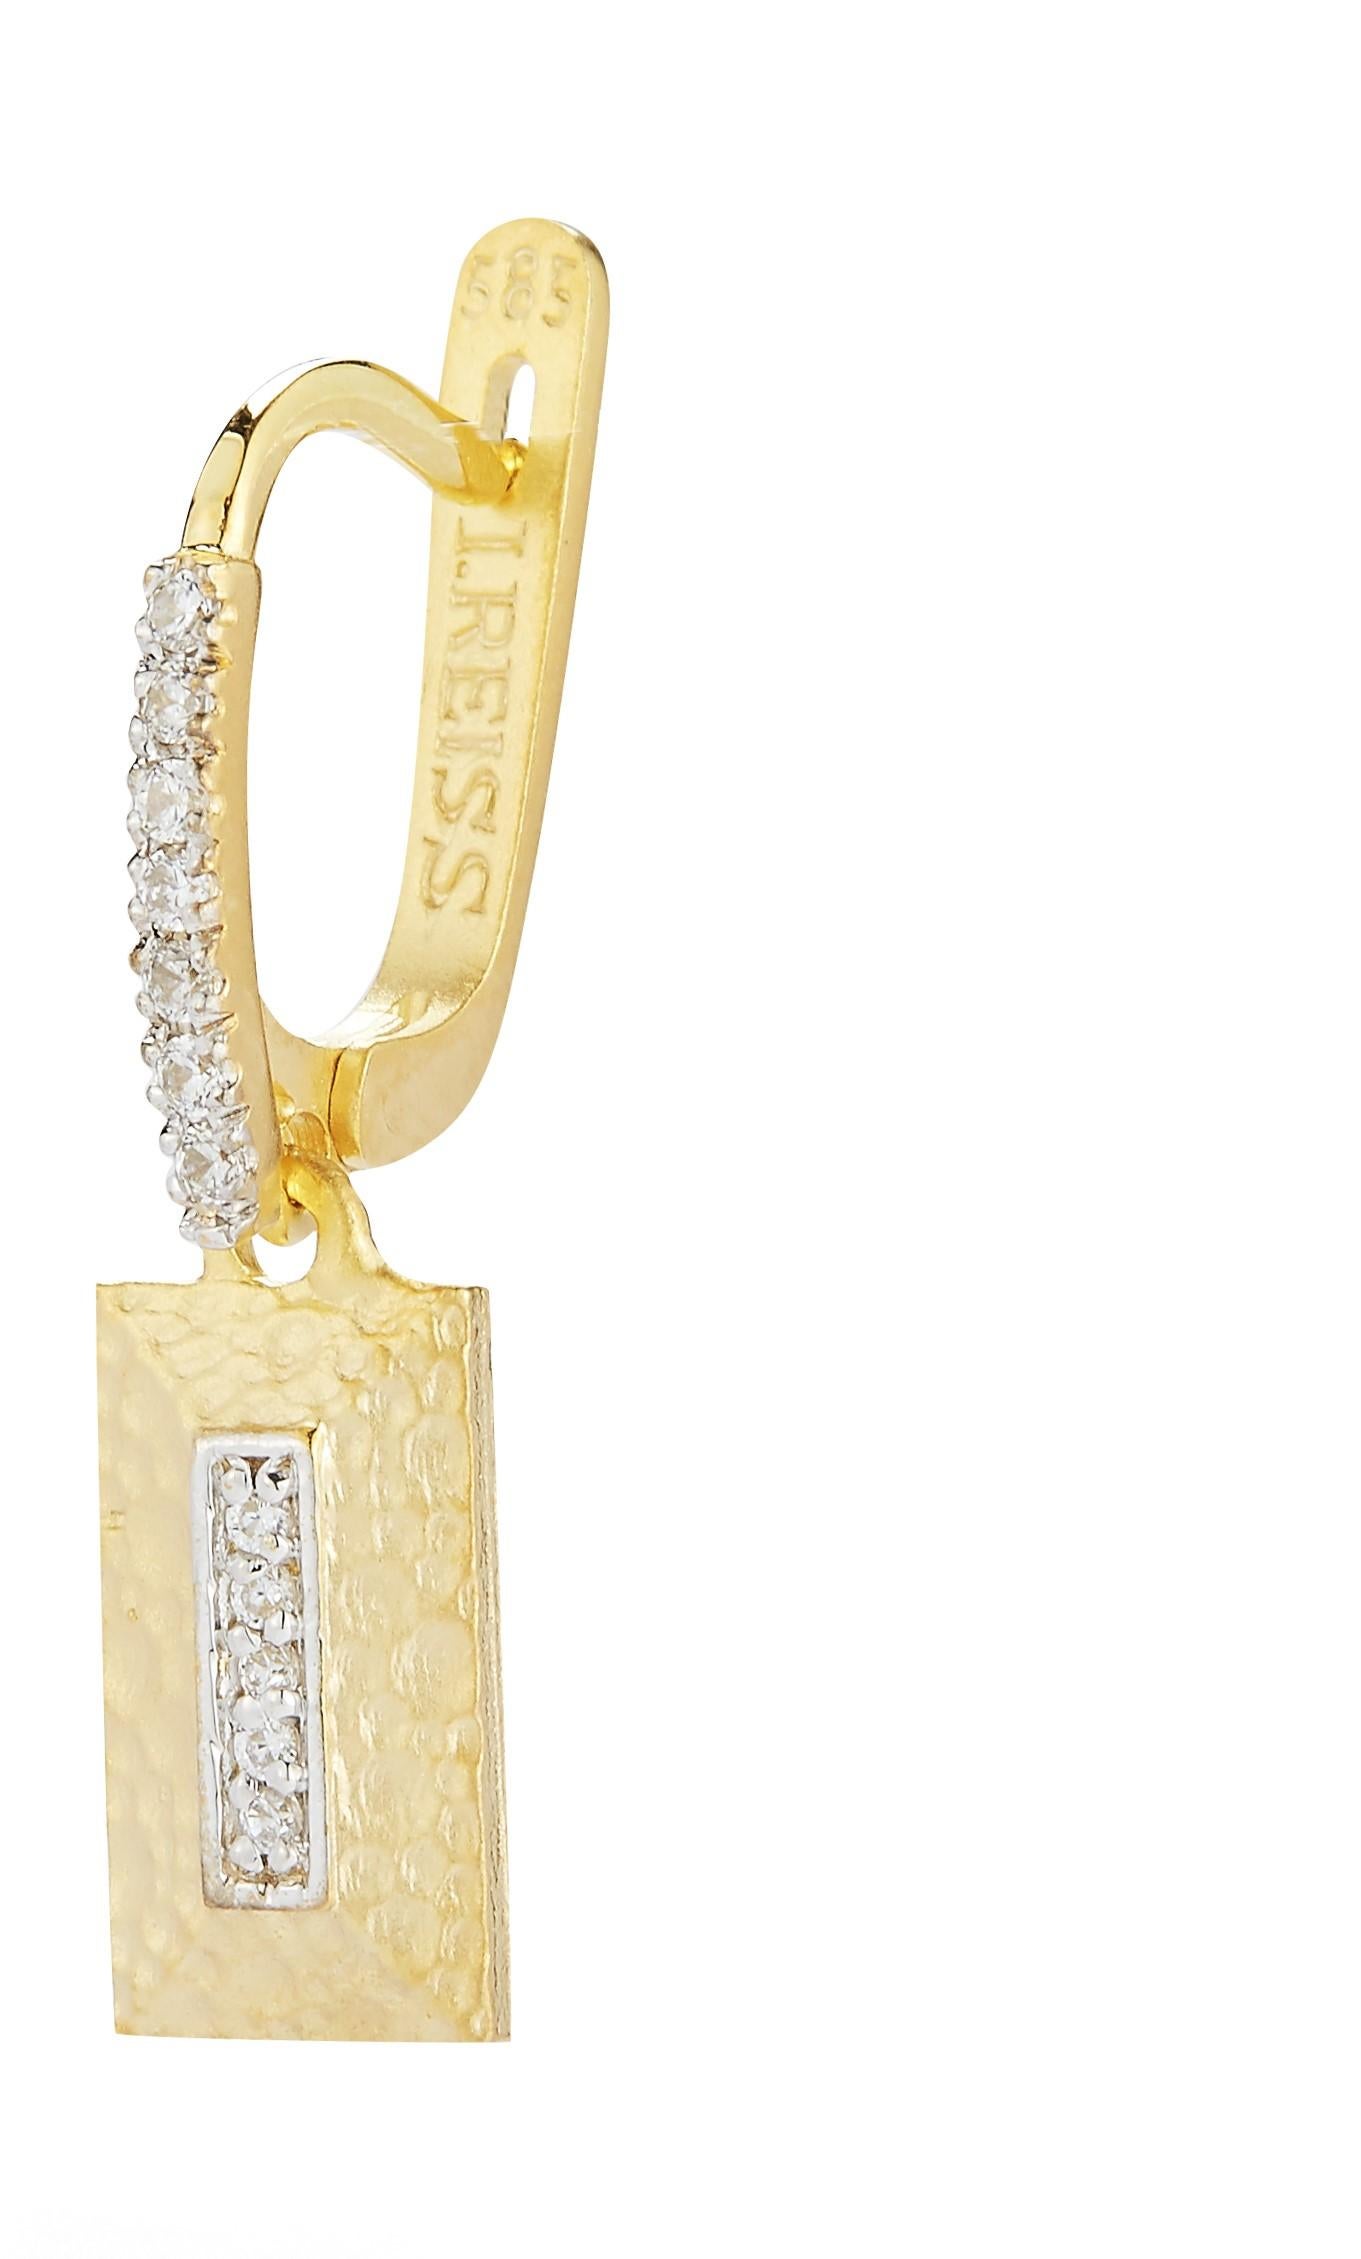 14 Karat Yellow Gold Hand-Crafted Matte and Hammer-Finished Rectangle-Shaped Dangling Earrings, Accented with 0.15 Carat Diamonds and Set on a Lever Back Closure.
